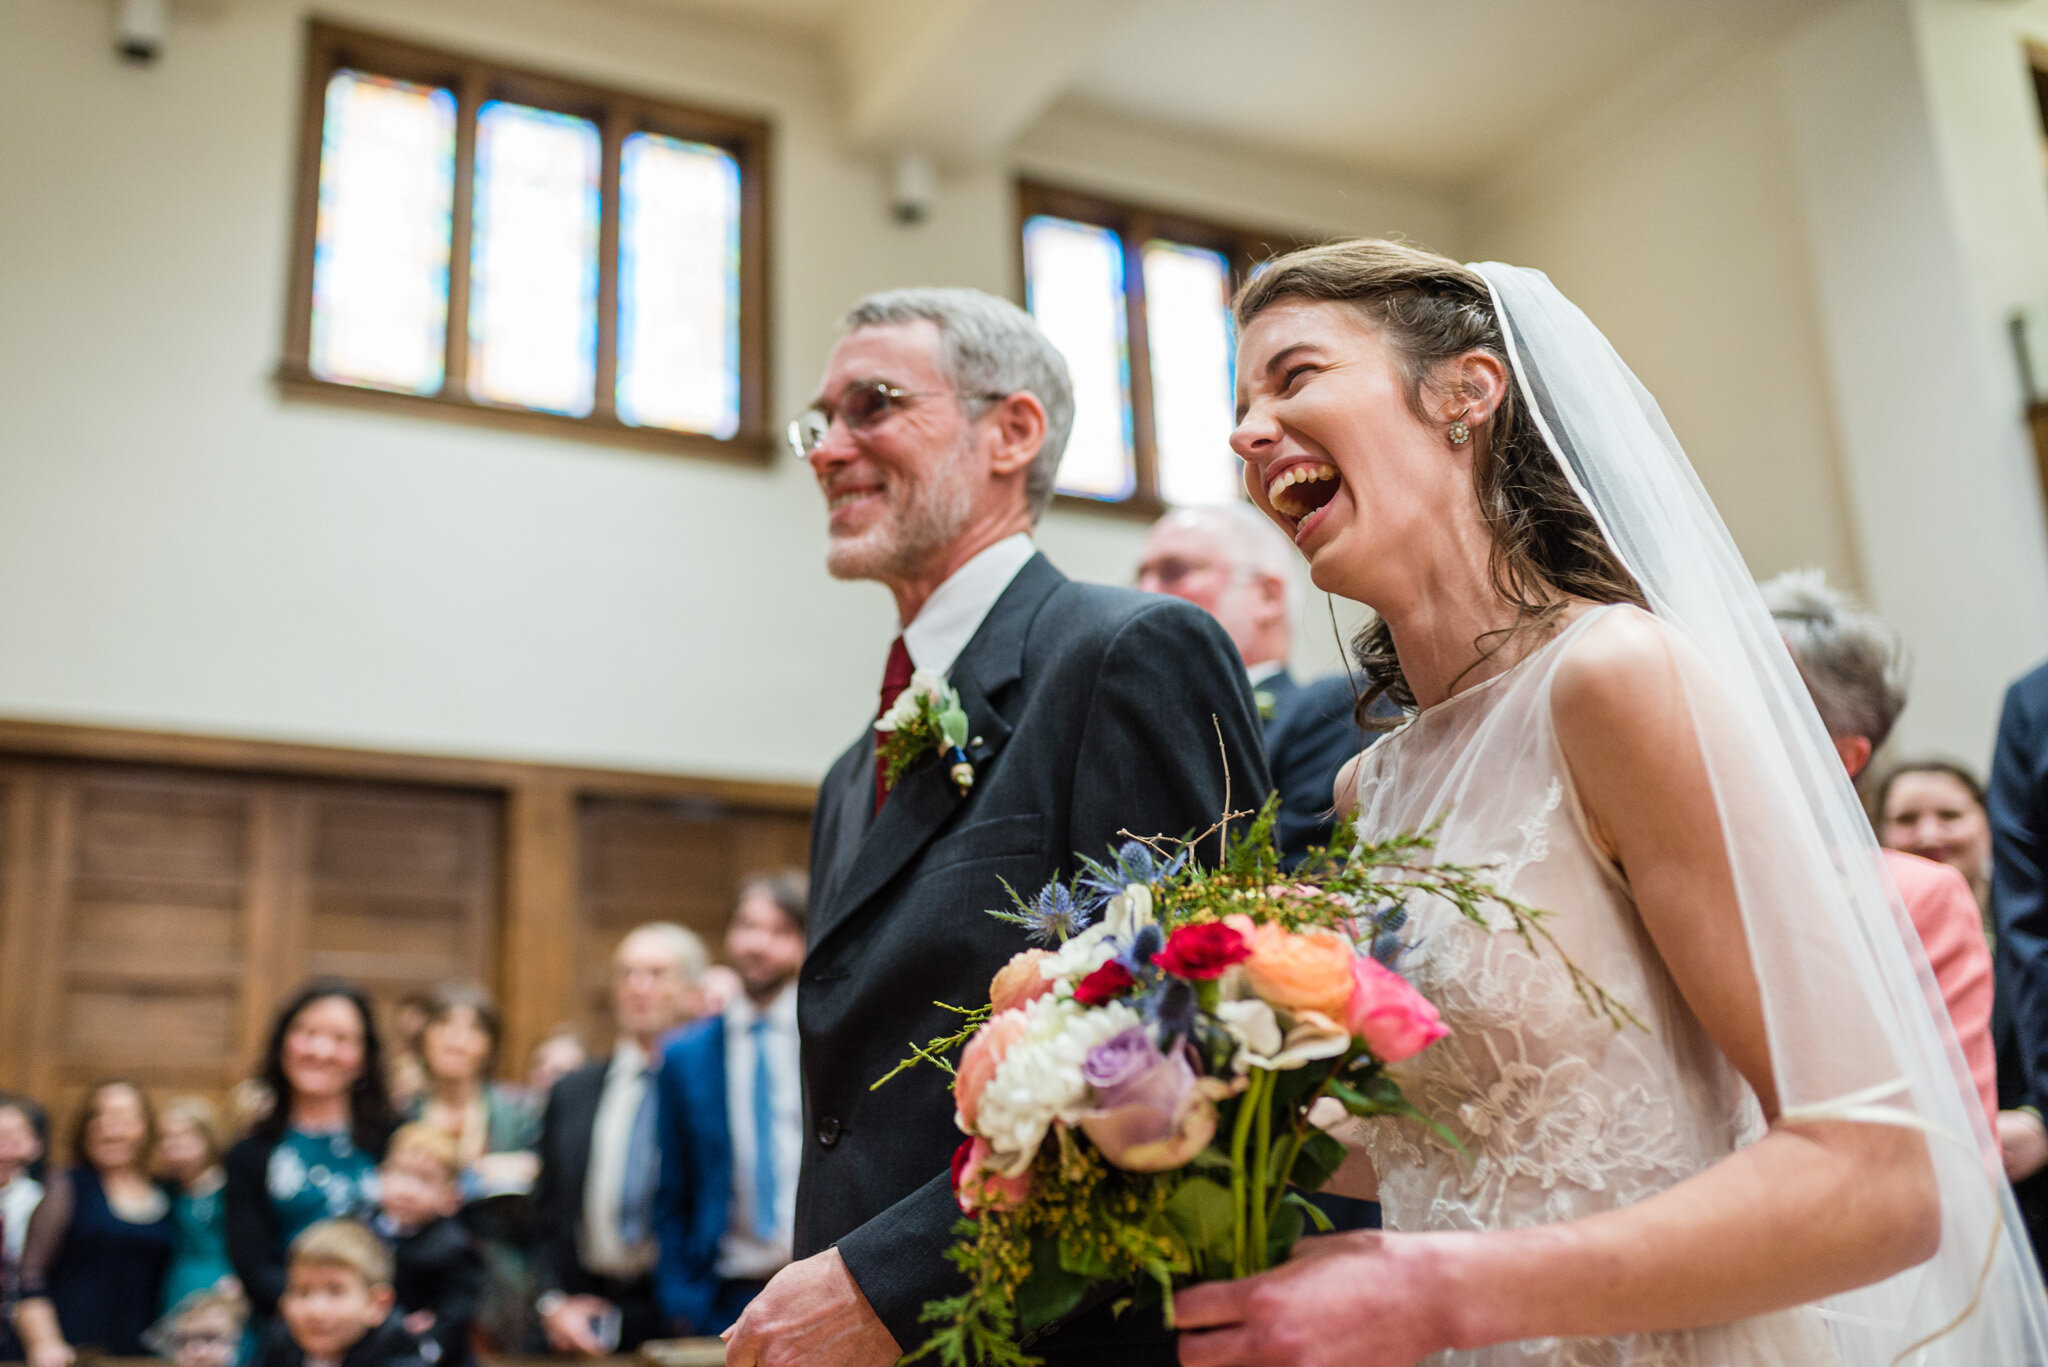 The bride laughs during her wedding ceremony